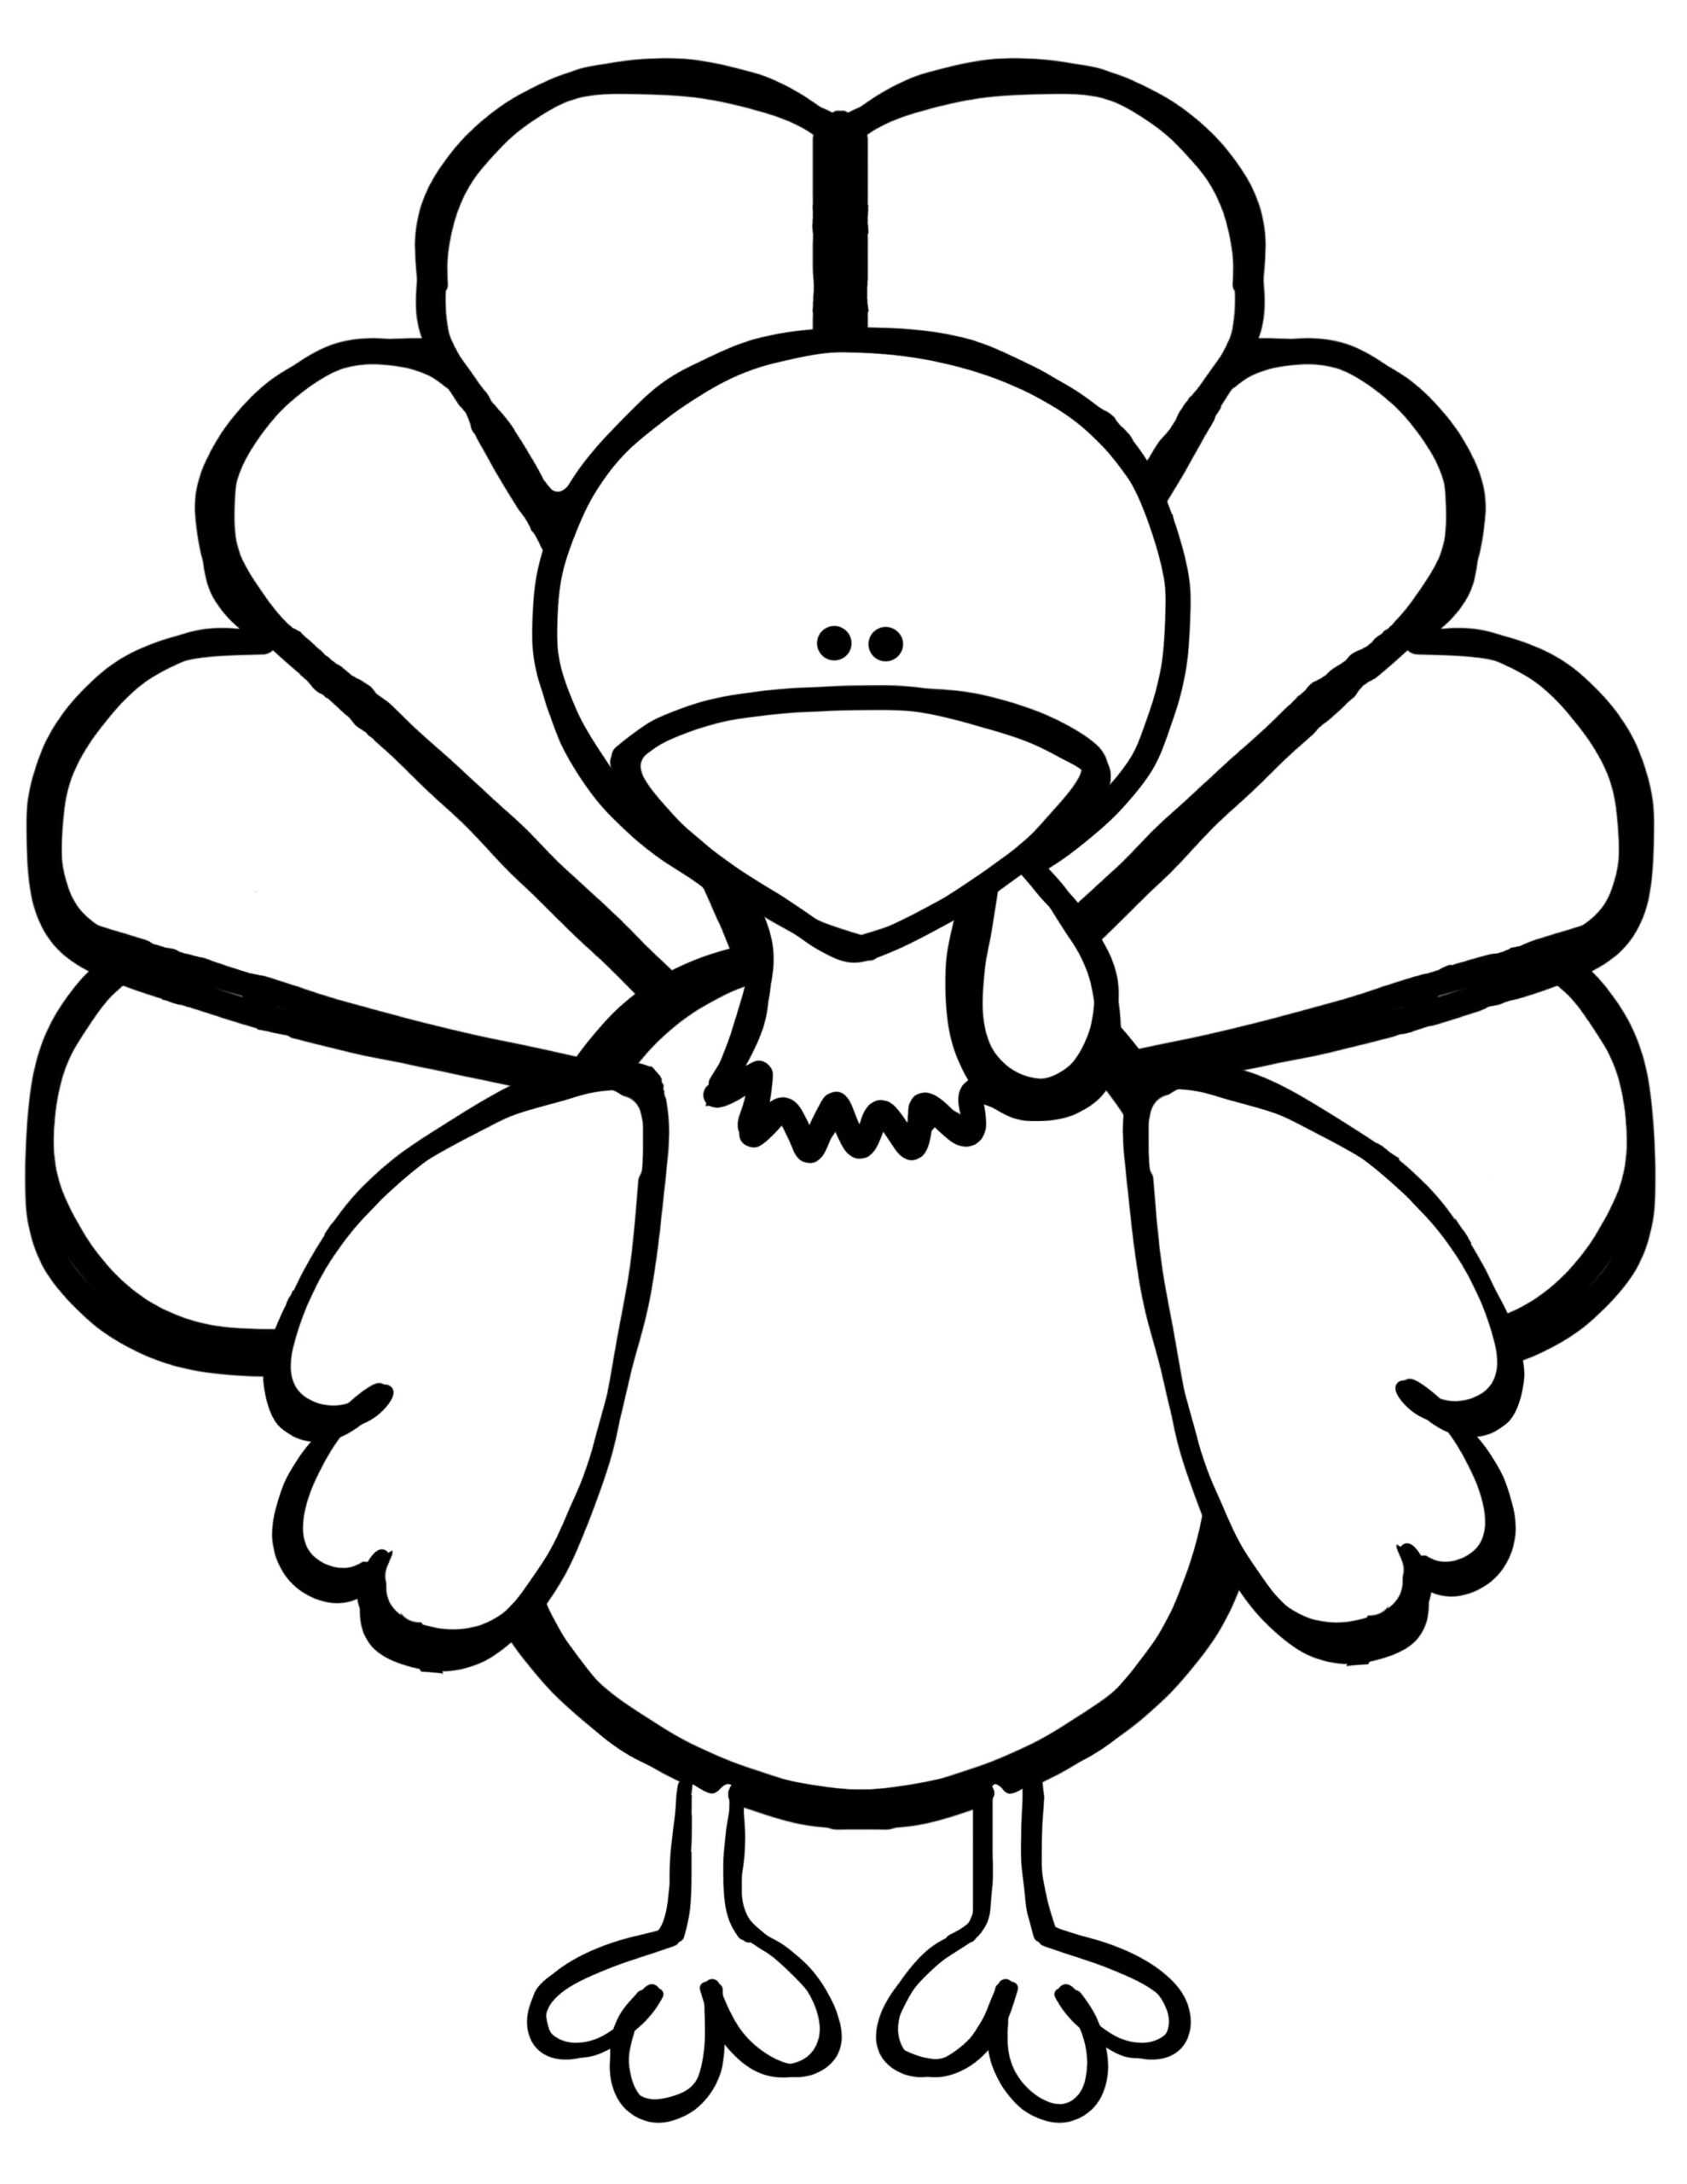 Everything You Need For The Turkey Disguise Project – Kids For Blank Turkey Template